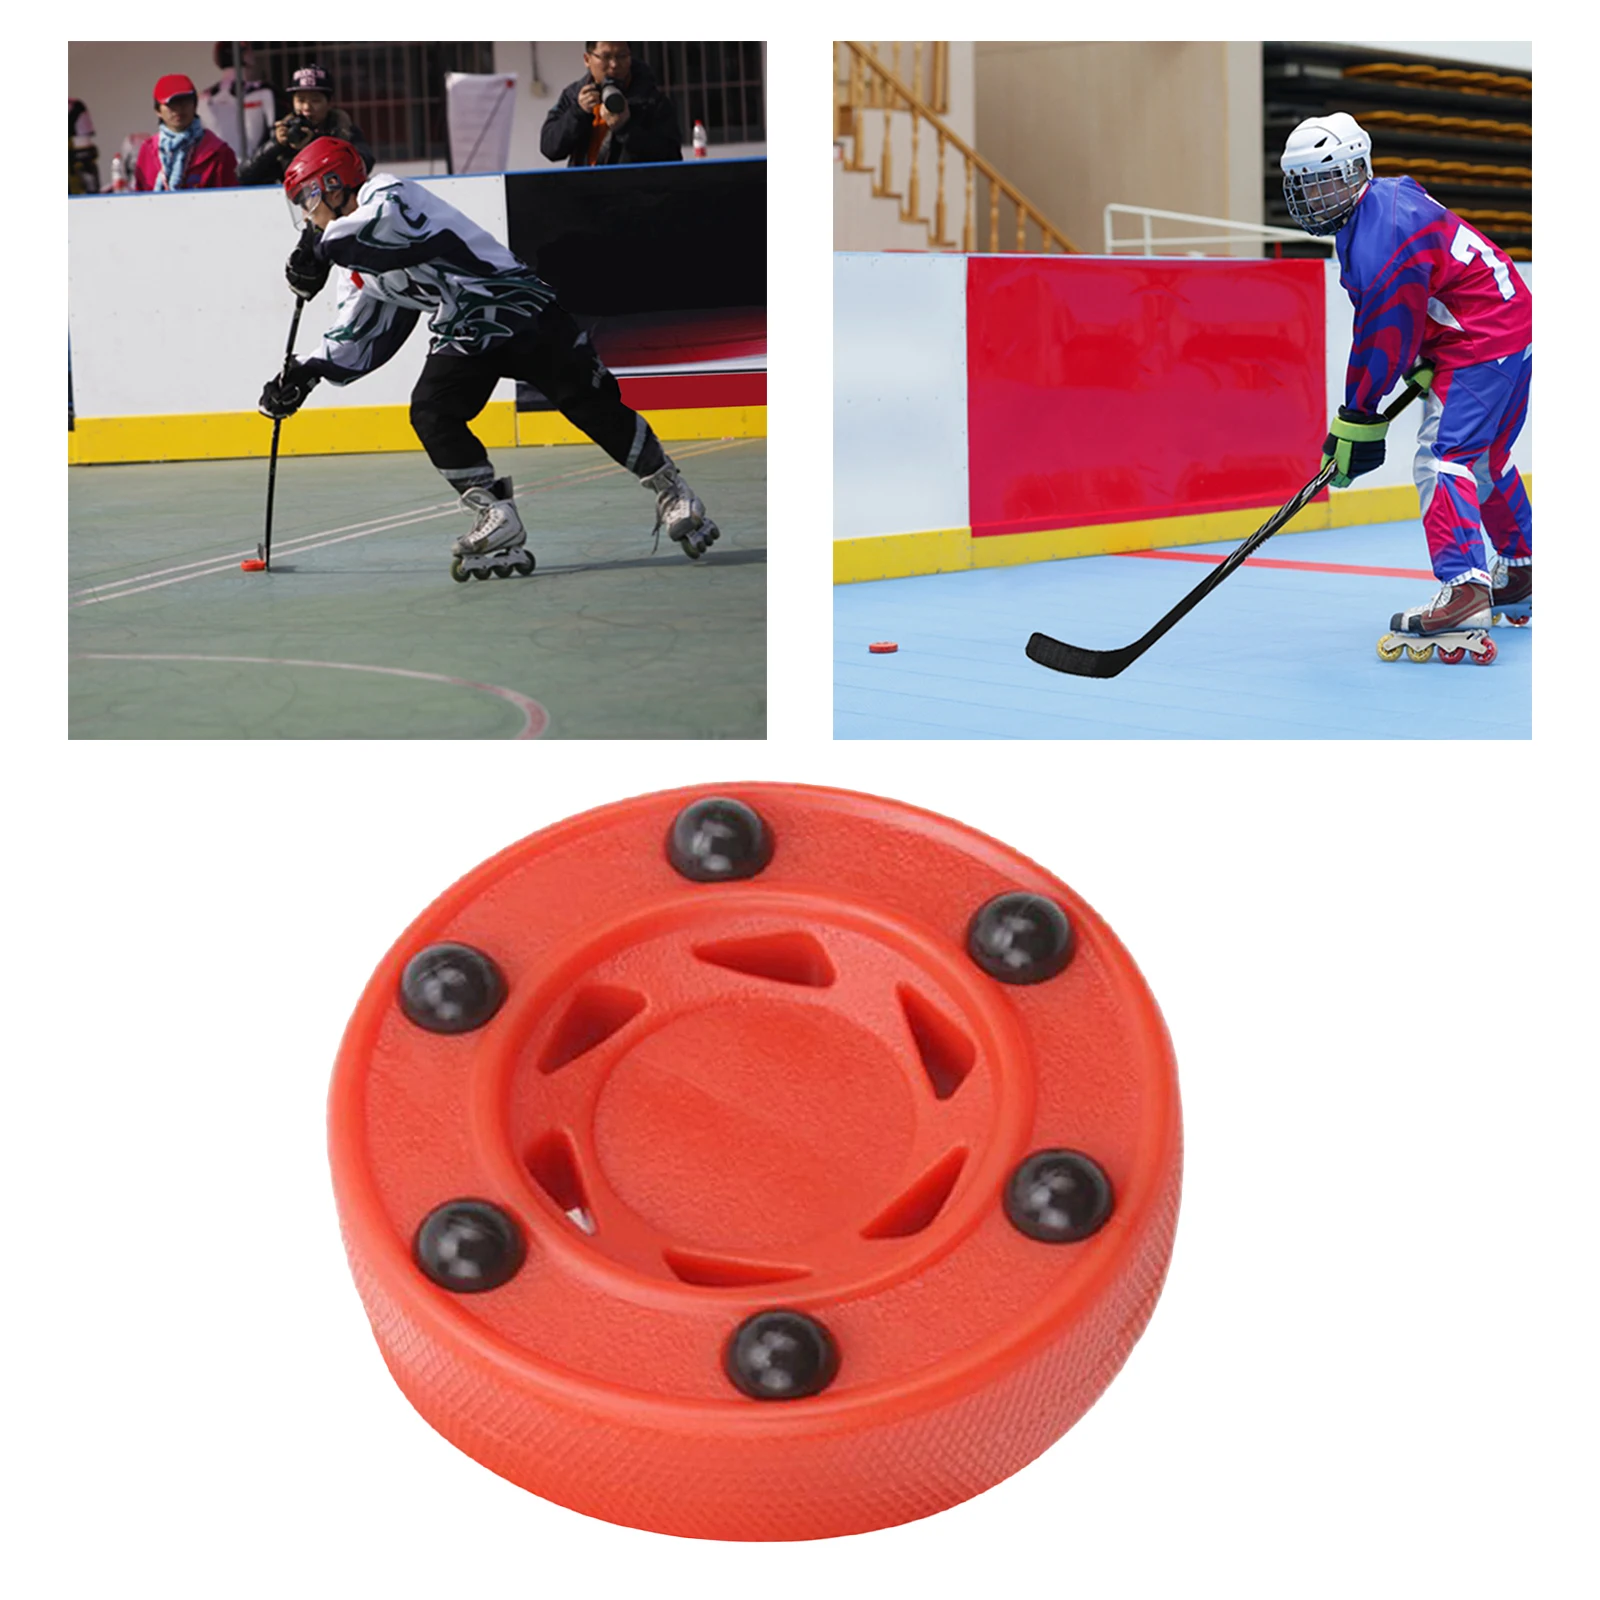 Details about   Ice Hockey Pucks Street Hockey Practice Puck Roller Hockey Ball for Training 